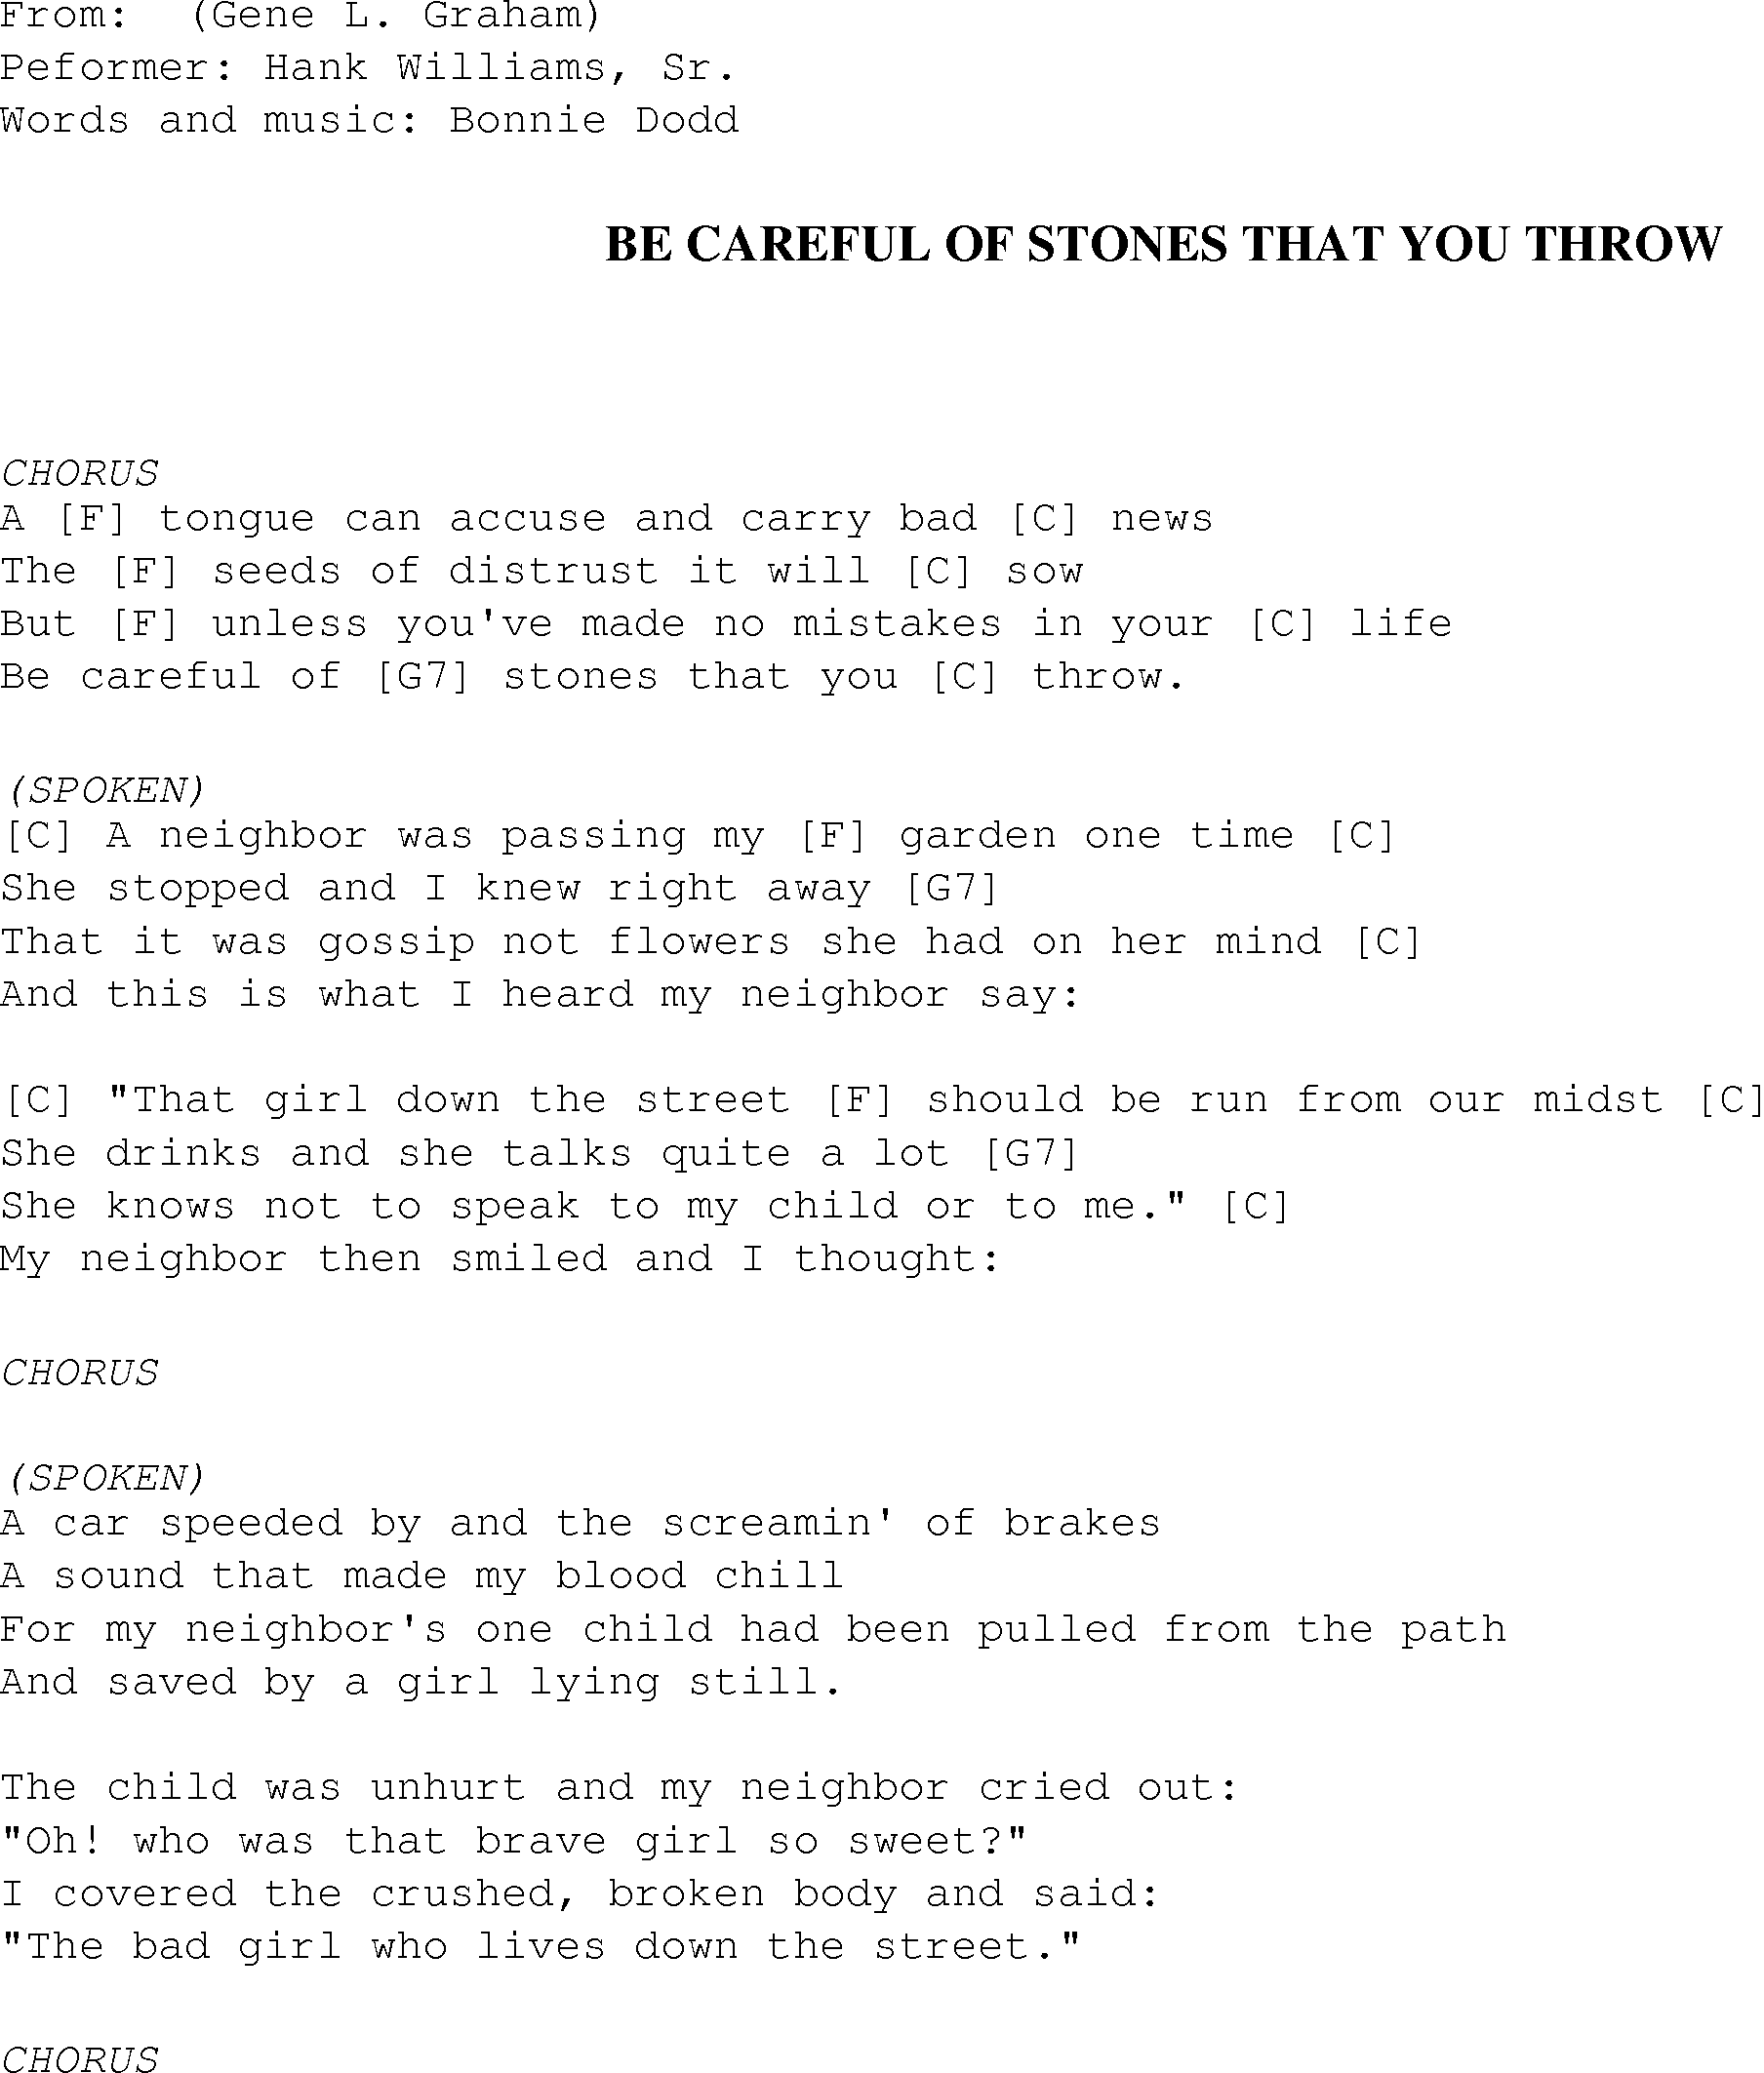 Gospel Song: be_careful_of_stones_that_you_throw, lyrics and chords.